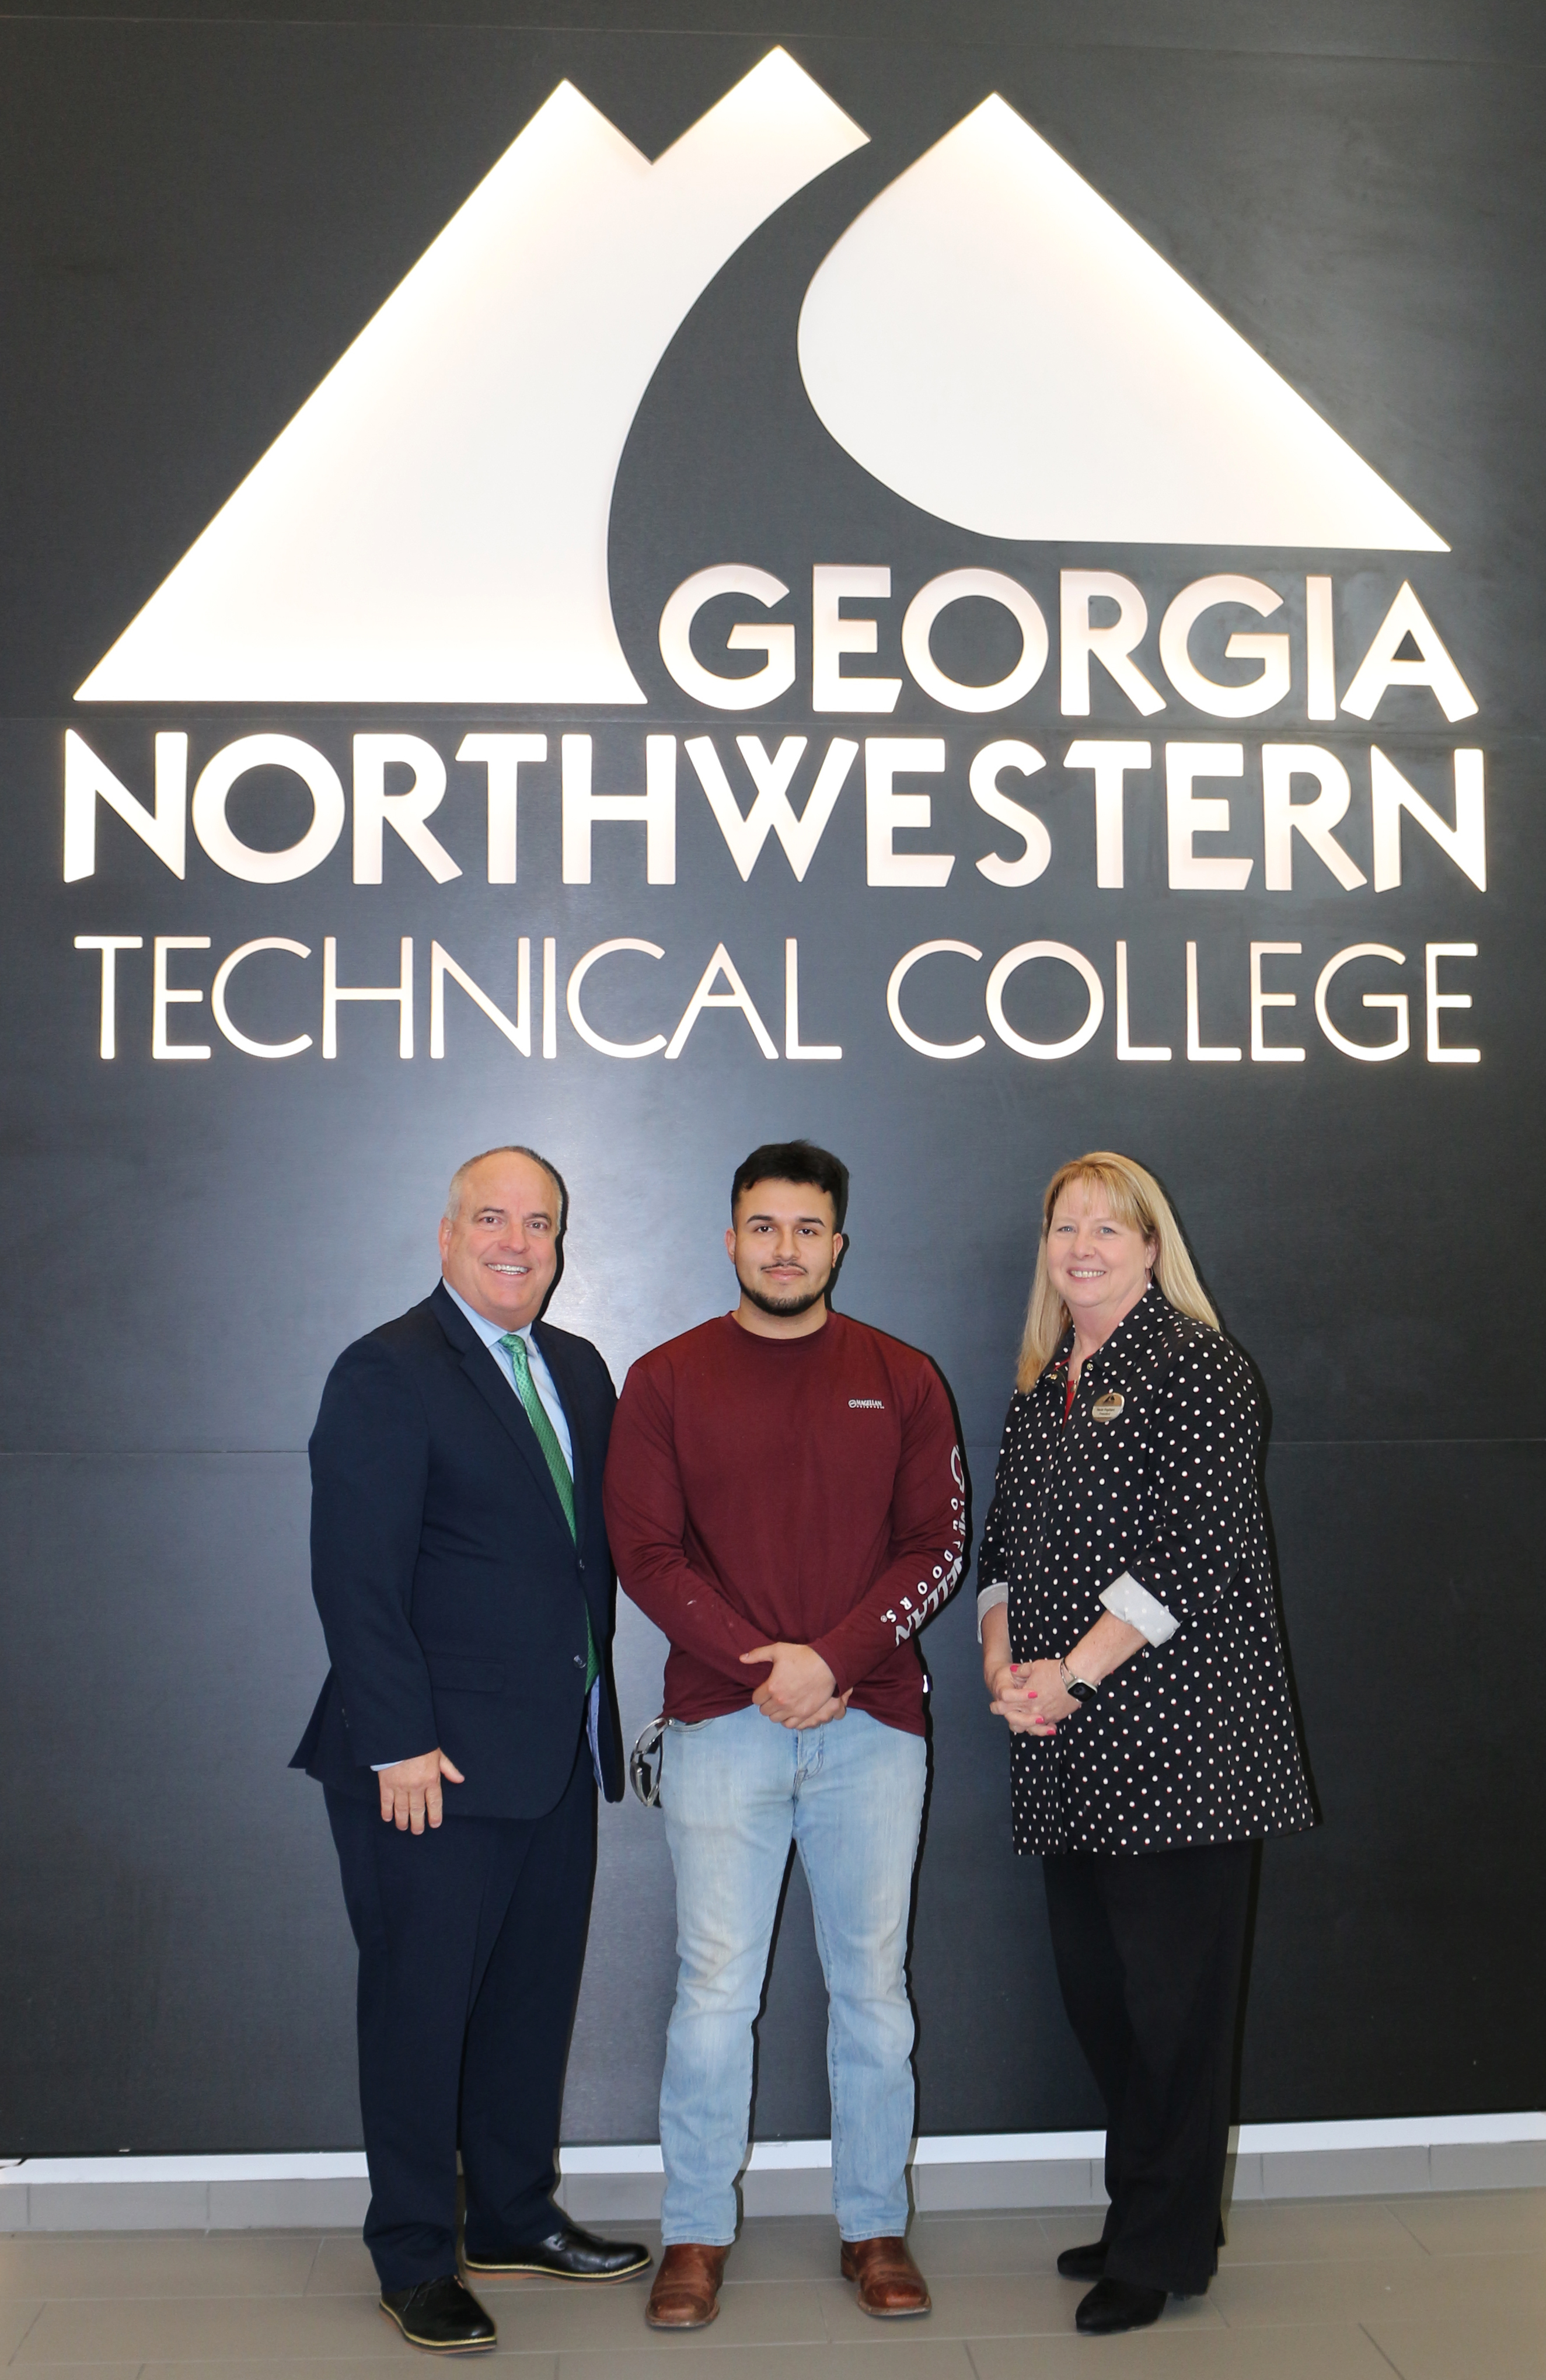 (From left) Russ DeLozier, The Carpet and Rug Institute president; GNTC student Angel Cruz, recipient of The Governor Nathan Deal Technical Education Scholarship; and Dr. Heidi Popham, GNTC president.